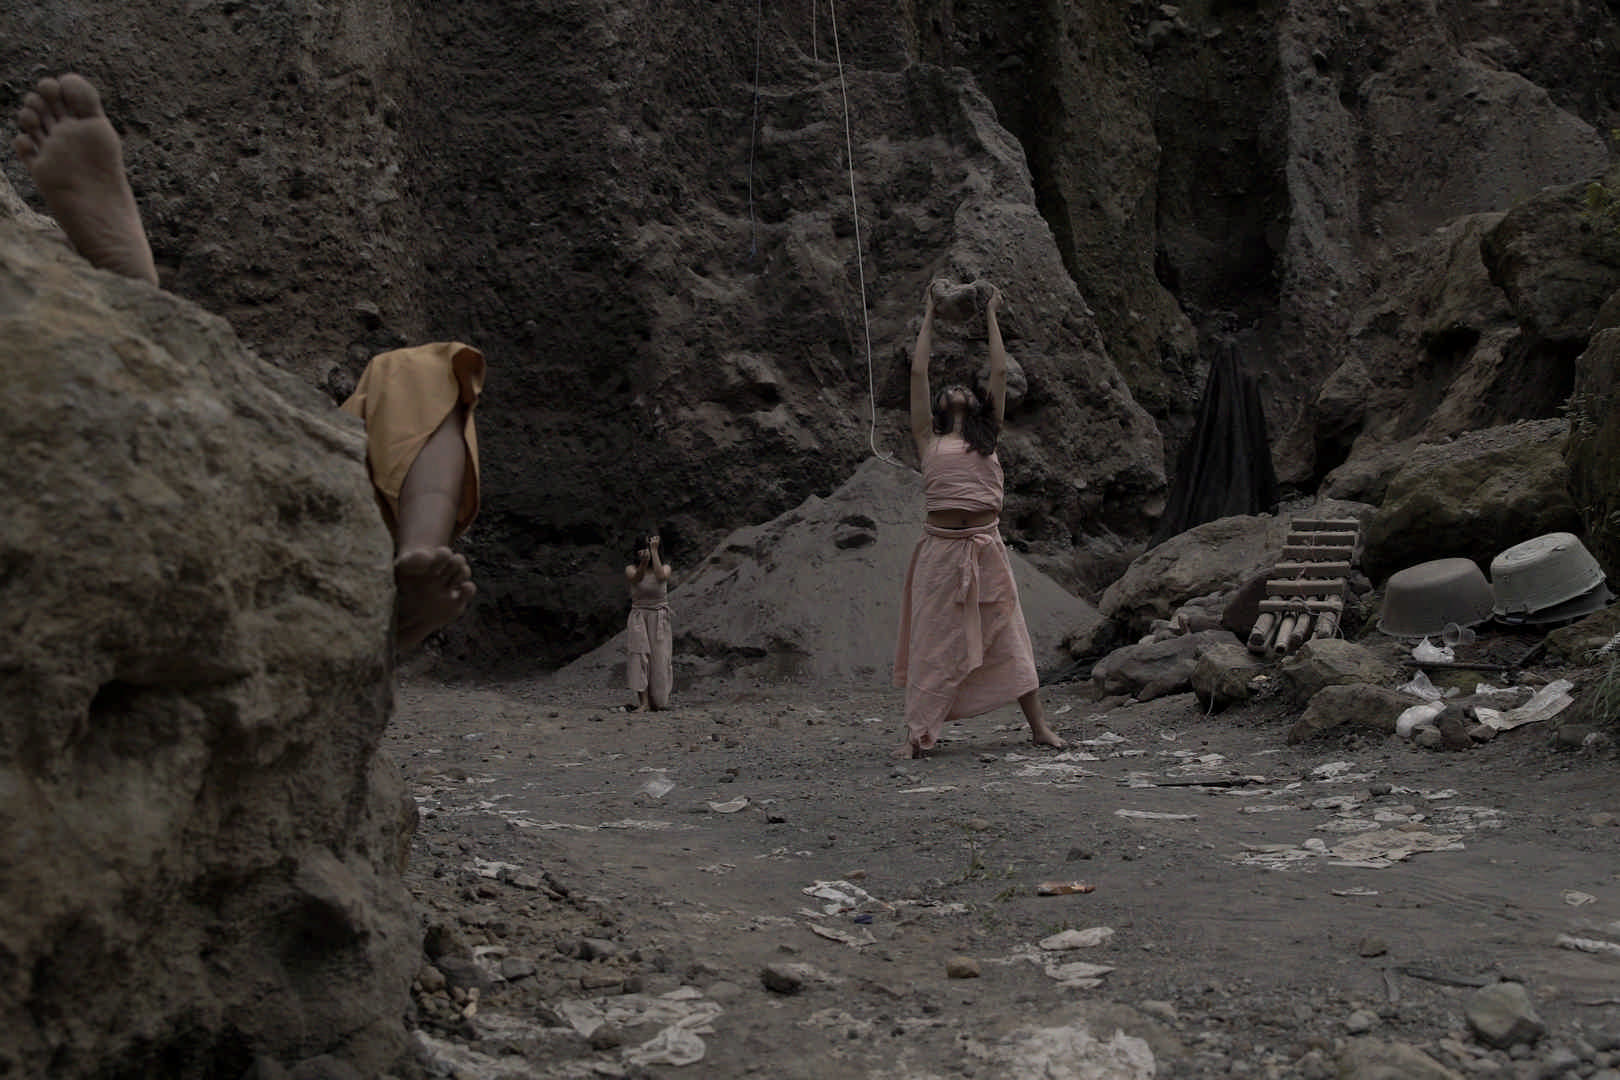 At the bottom of a dusty, earthy ravine, a person stands just off centre, they are wearing a pale pink wrap top and wrap skirt, they raise a large rock above their heads and look towards the rock. A second person dressed in a beige top and trousers raises both arms so their face is covered. A third person’s feet are visible. The soles of their feet face the camera and they appear to be lying on top of a tall rock formation. White plastic bags are trampled and strewn in the earth and a washing tub and wooden ladder-like structure are in frame.